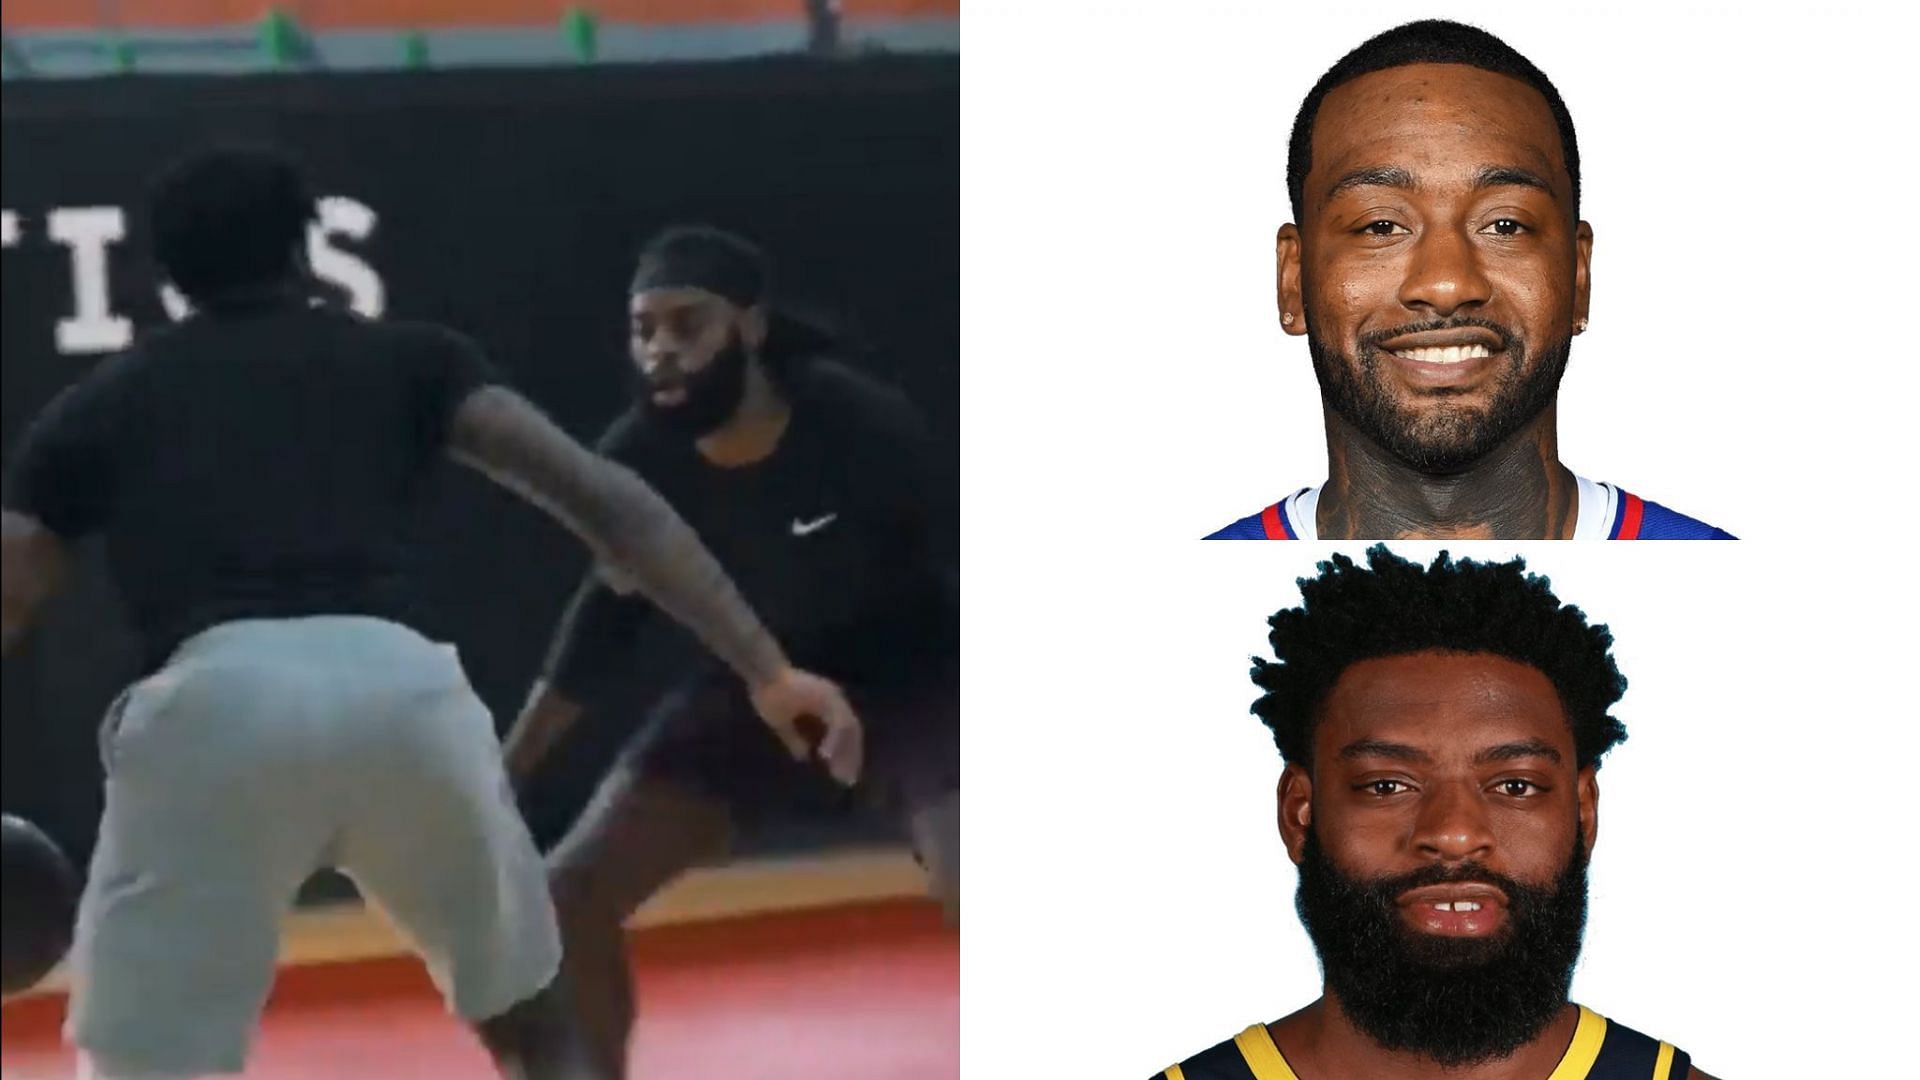 John Wall and Tyreke Evans engage in a heated exchange as they go back and forth scoring in an intense open gym showdown.